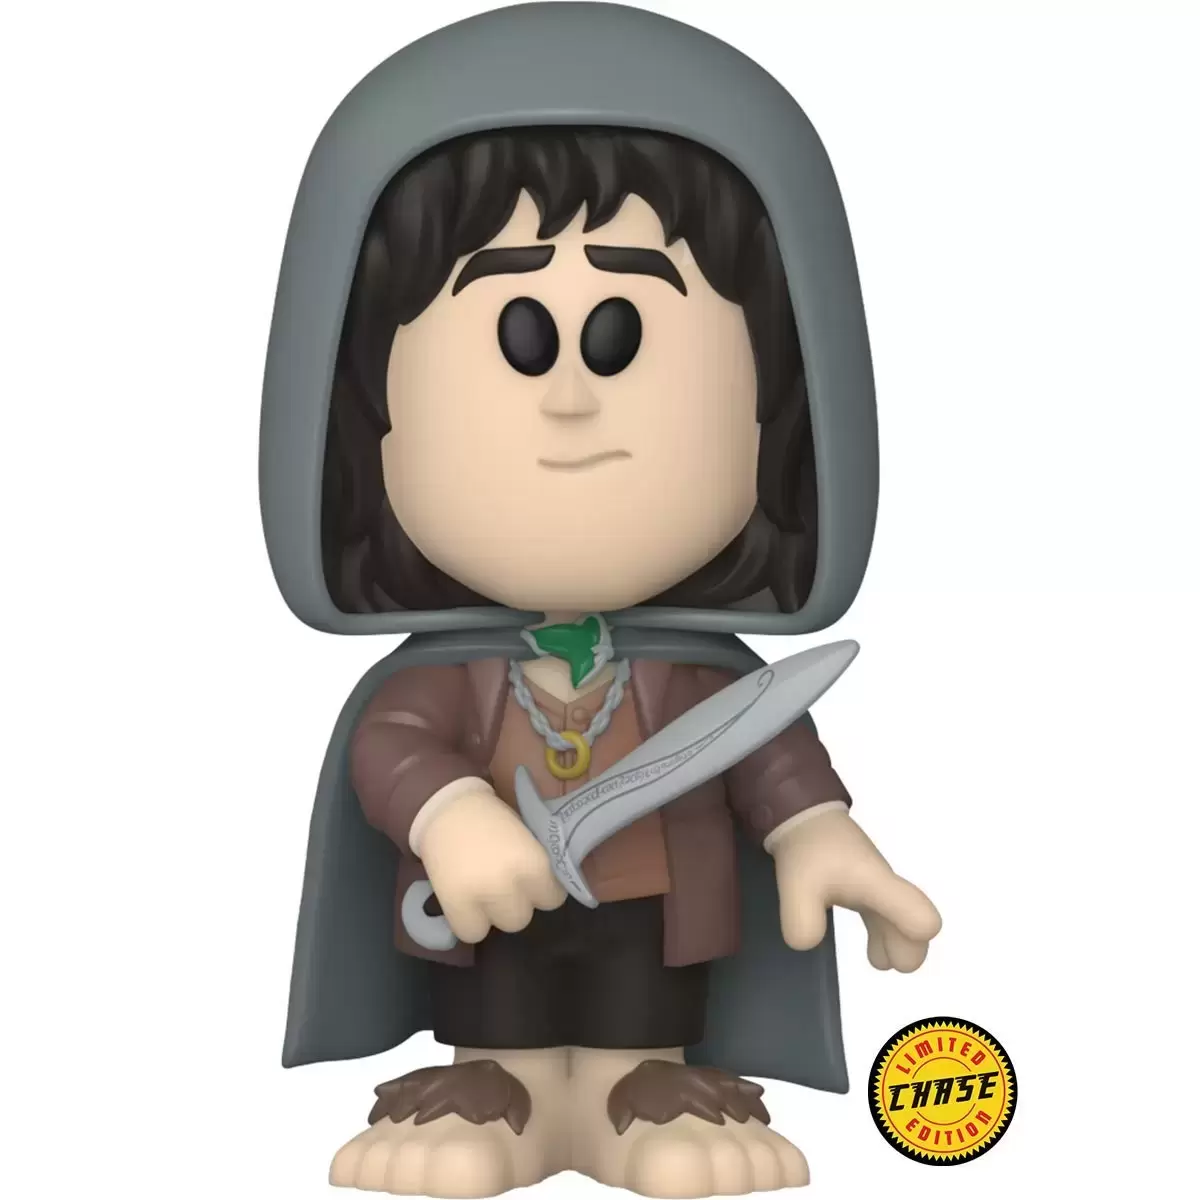 Vinyl Soda! - The Lord of the Rings - Frodo Baggins Chase